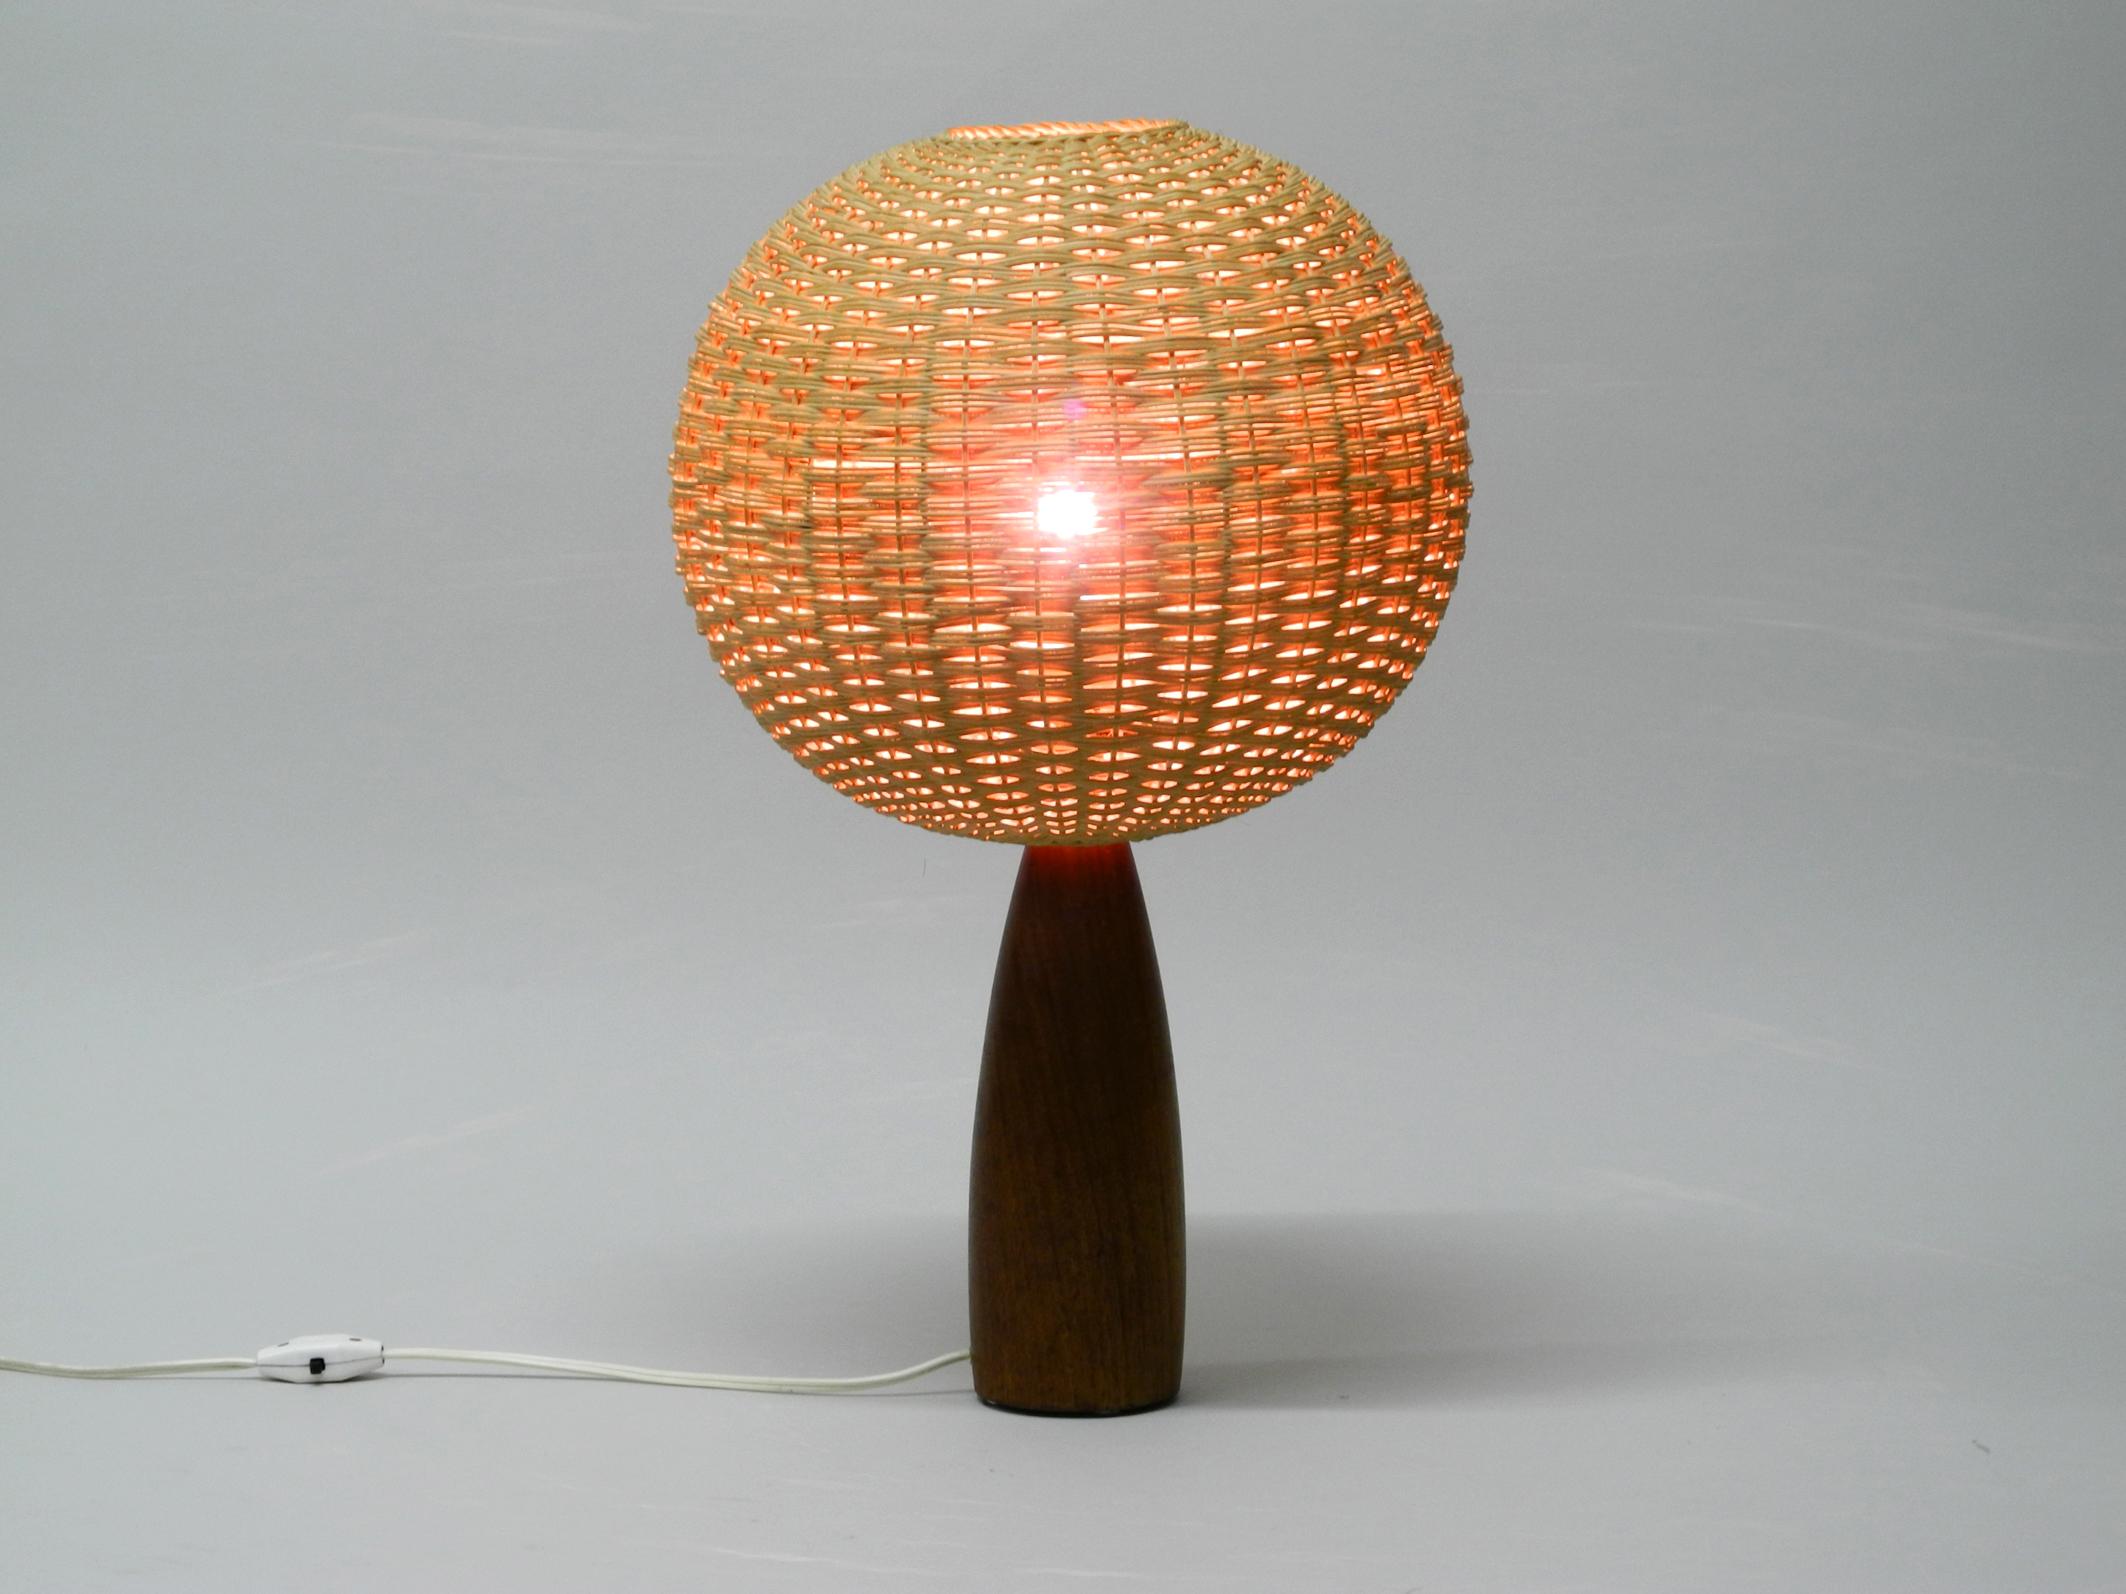 Large elegant 1960s teak table lamp with large wicker lampshade. 
Great 1960s design in very good vintage condition. From a scandinavian production. 
Most likely from Denmark.
The spherical basket lampshade is made of fine wicker. 
Creates a